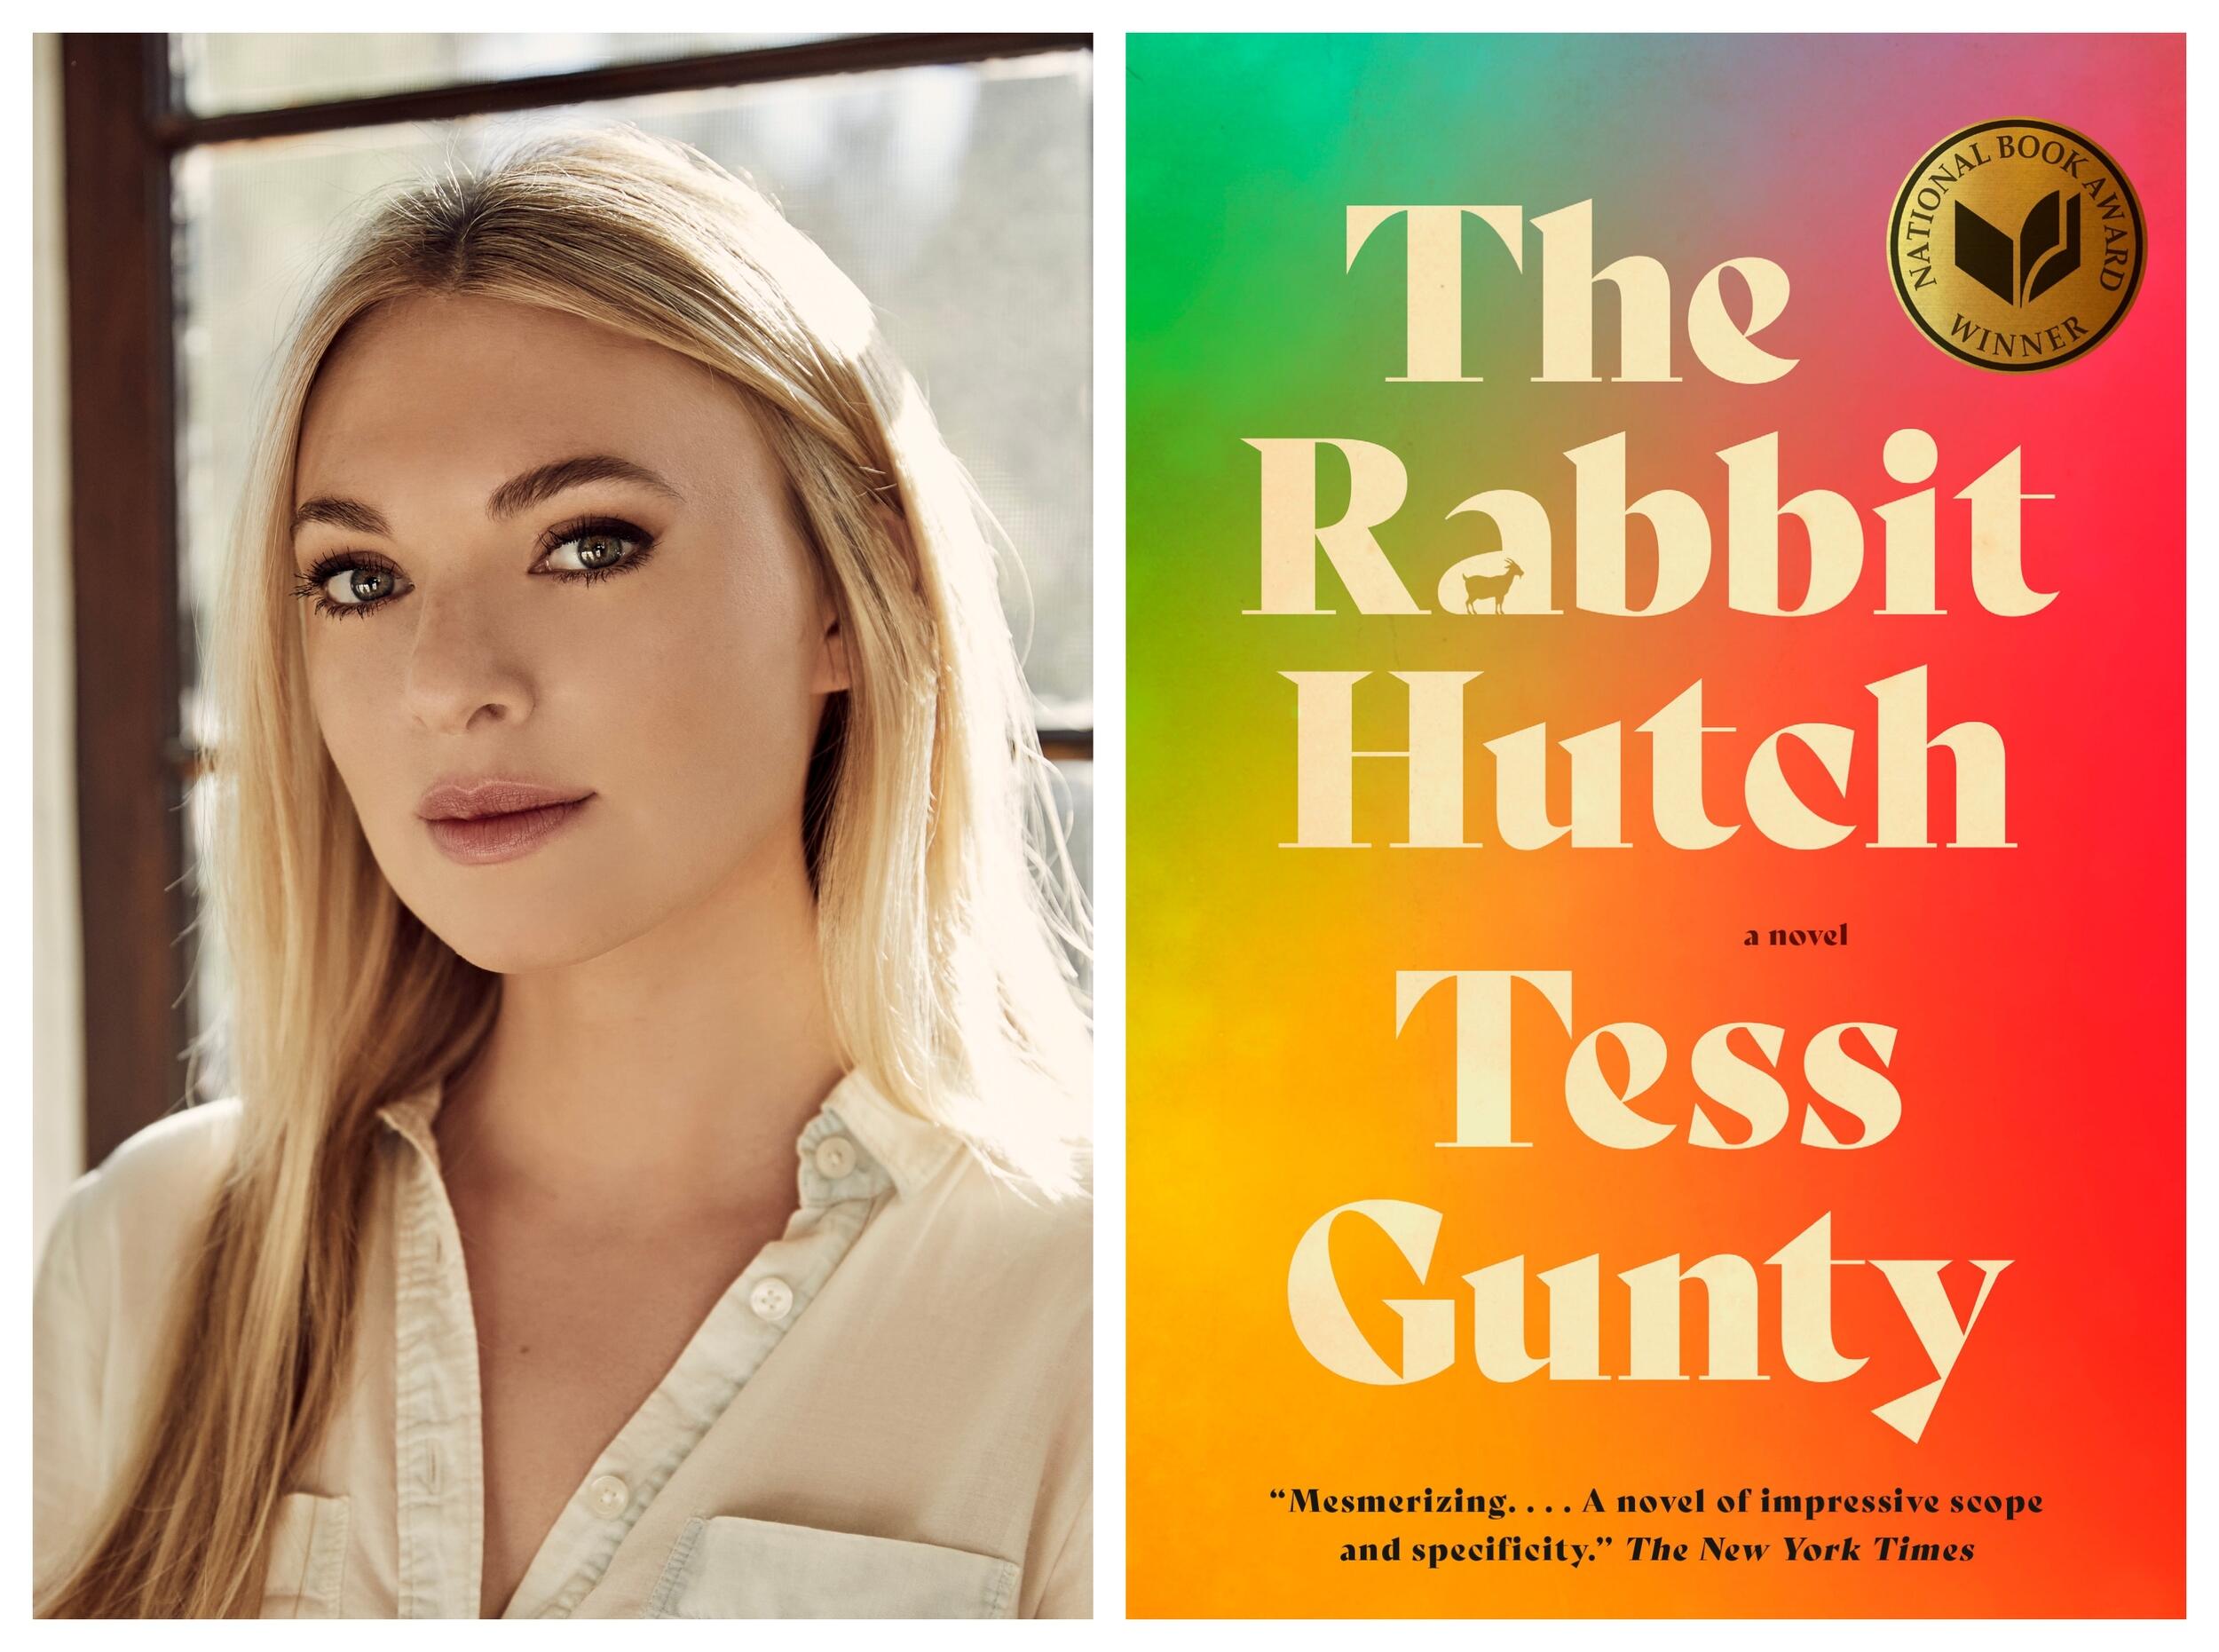 A portait of a woman next to a picture of abook cover with the text \"The Rabbit Hutch a novel Tess Gunty\"